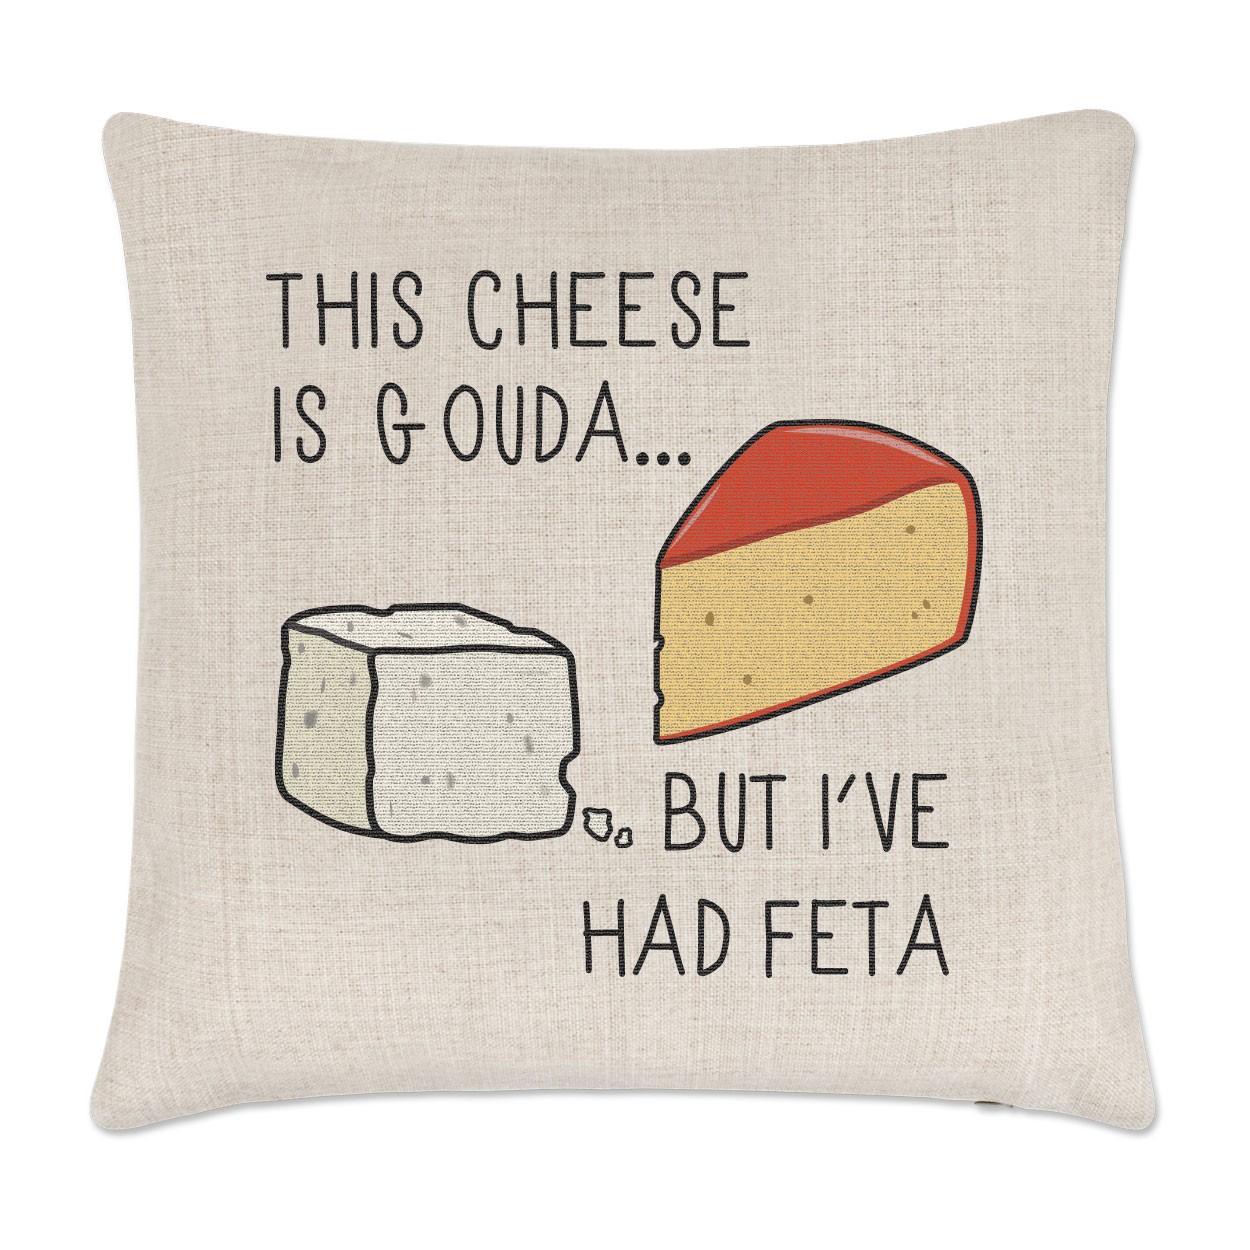 This Cheese Is Gouda But I've Had Feta Linen Cushion Cover